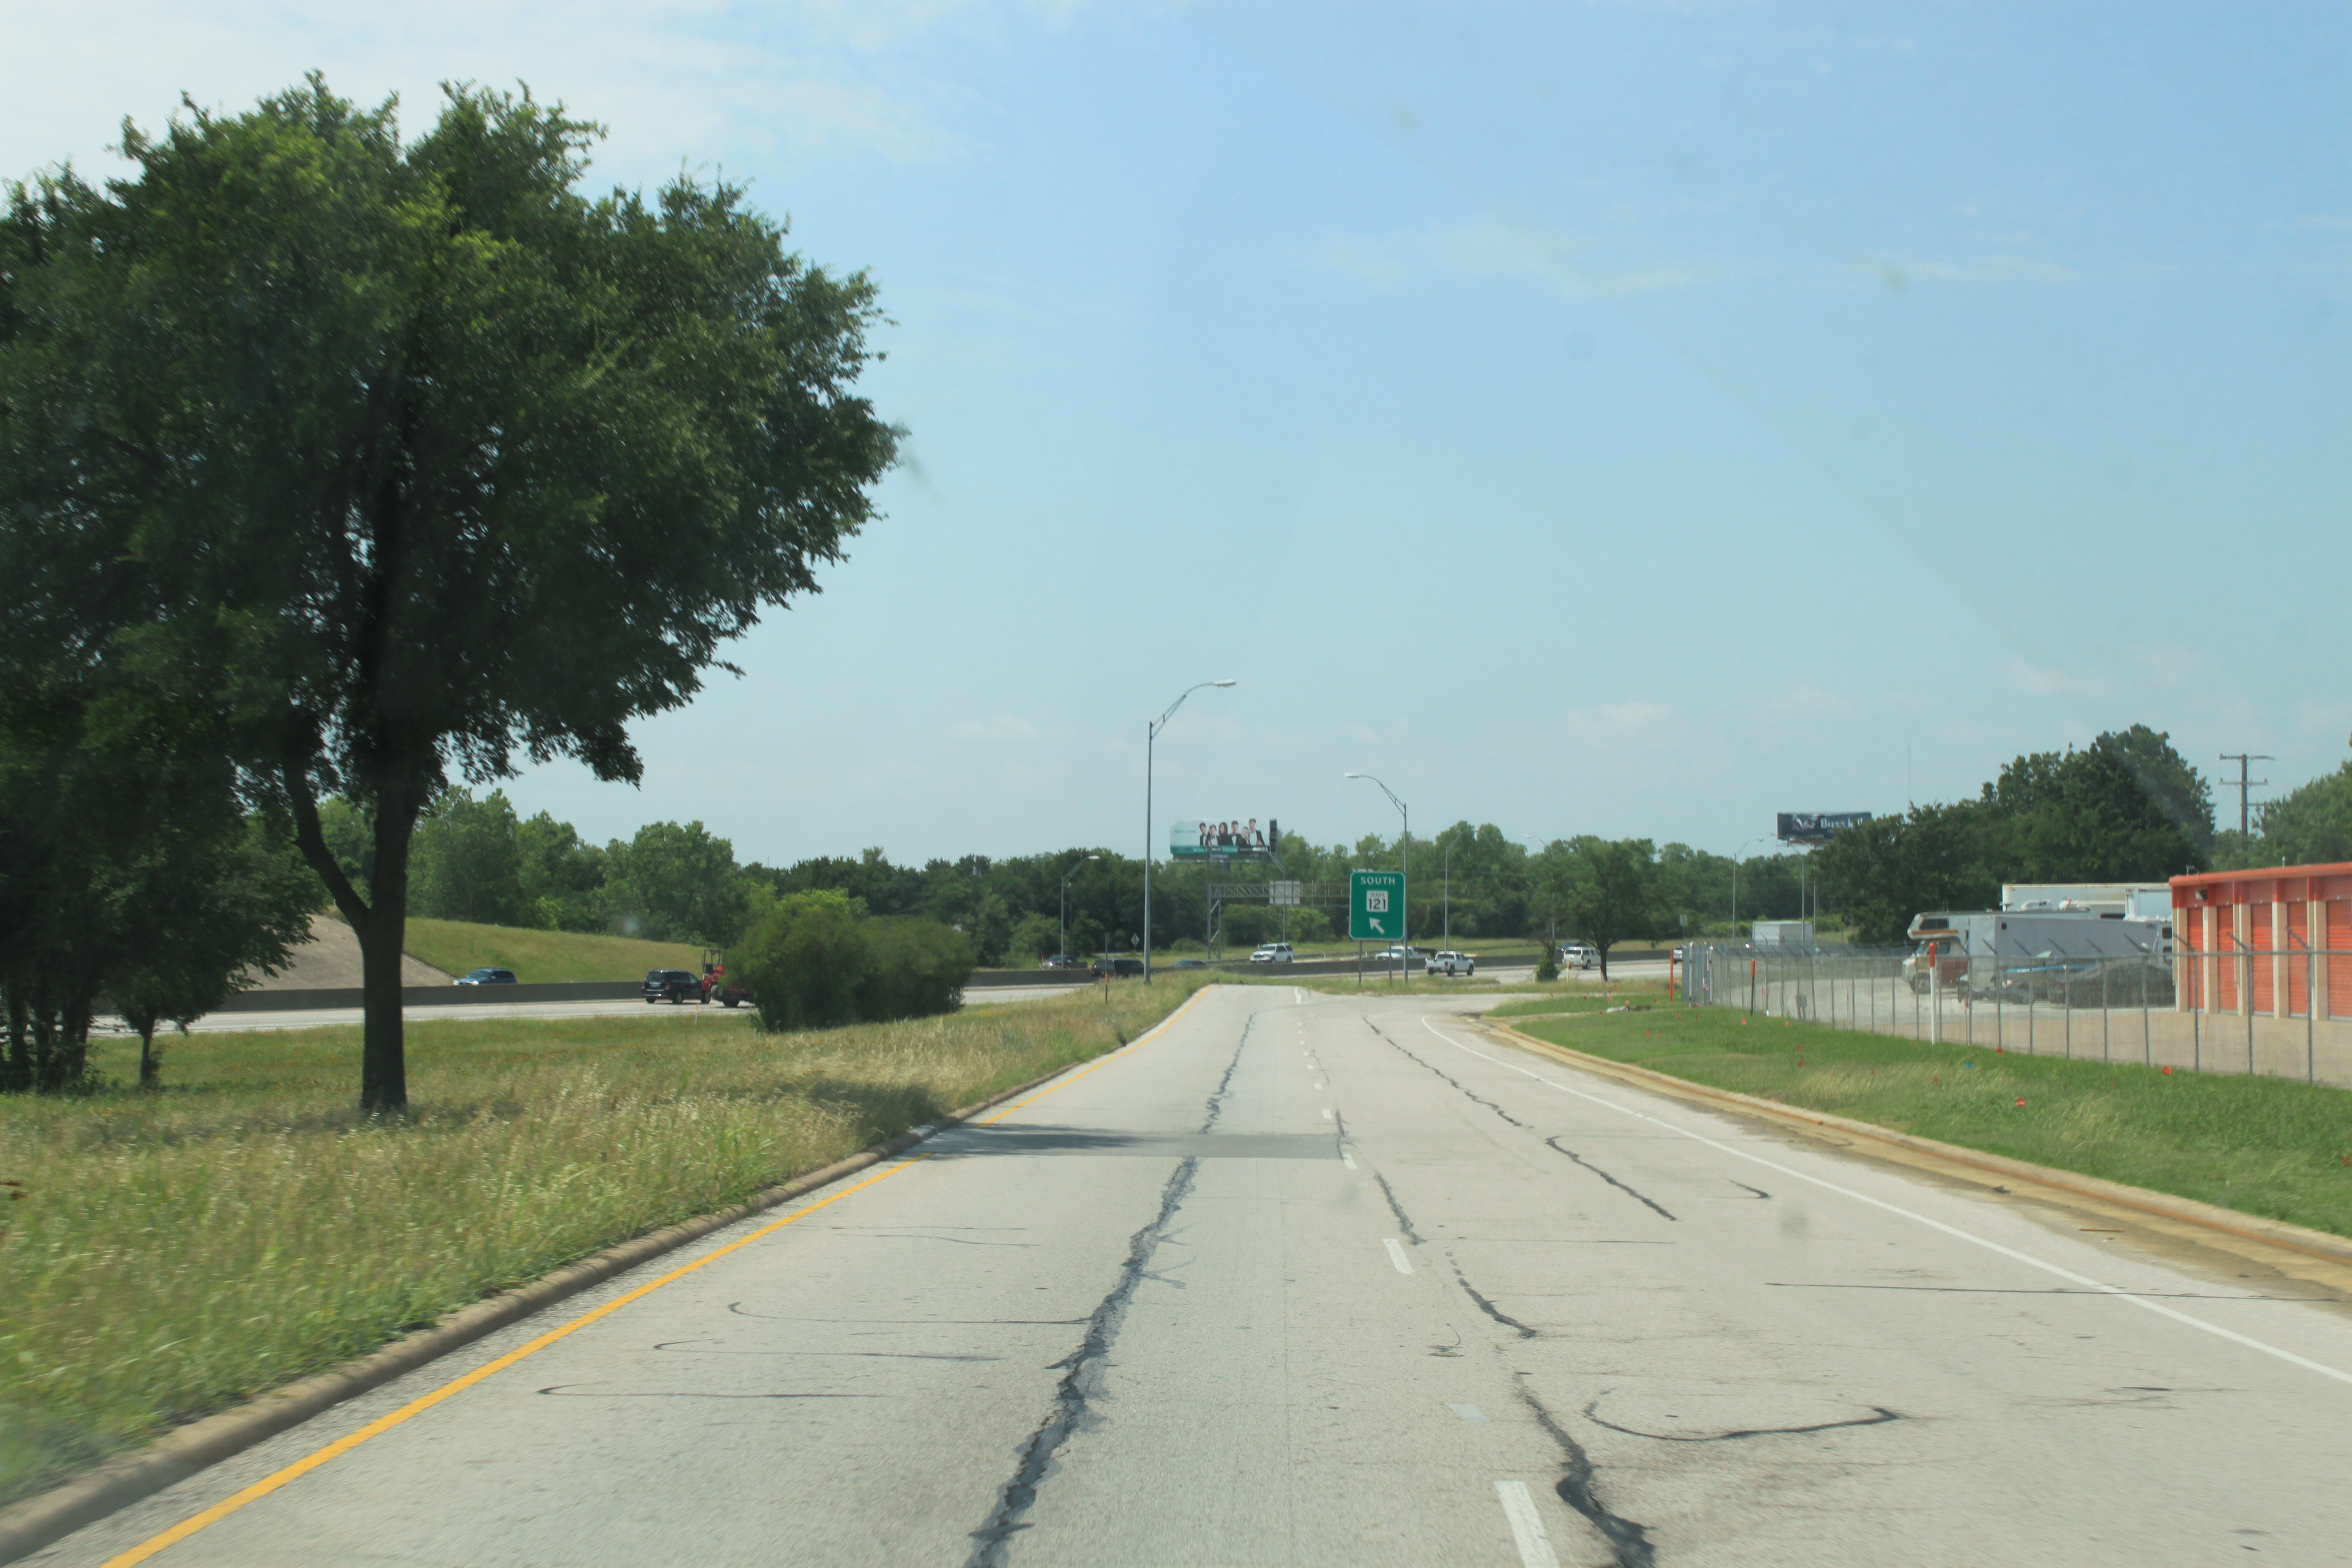 SH 121 southbound frontage road south of Hurst Blvd. Entrance ramp to SH 121 in background.